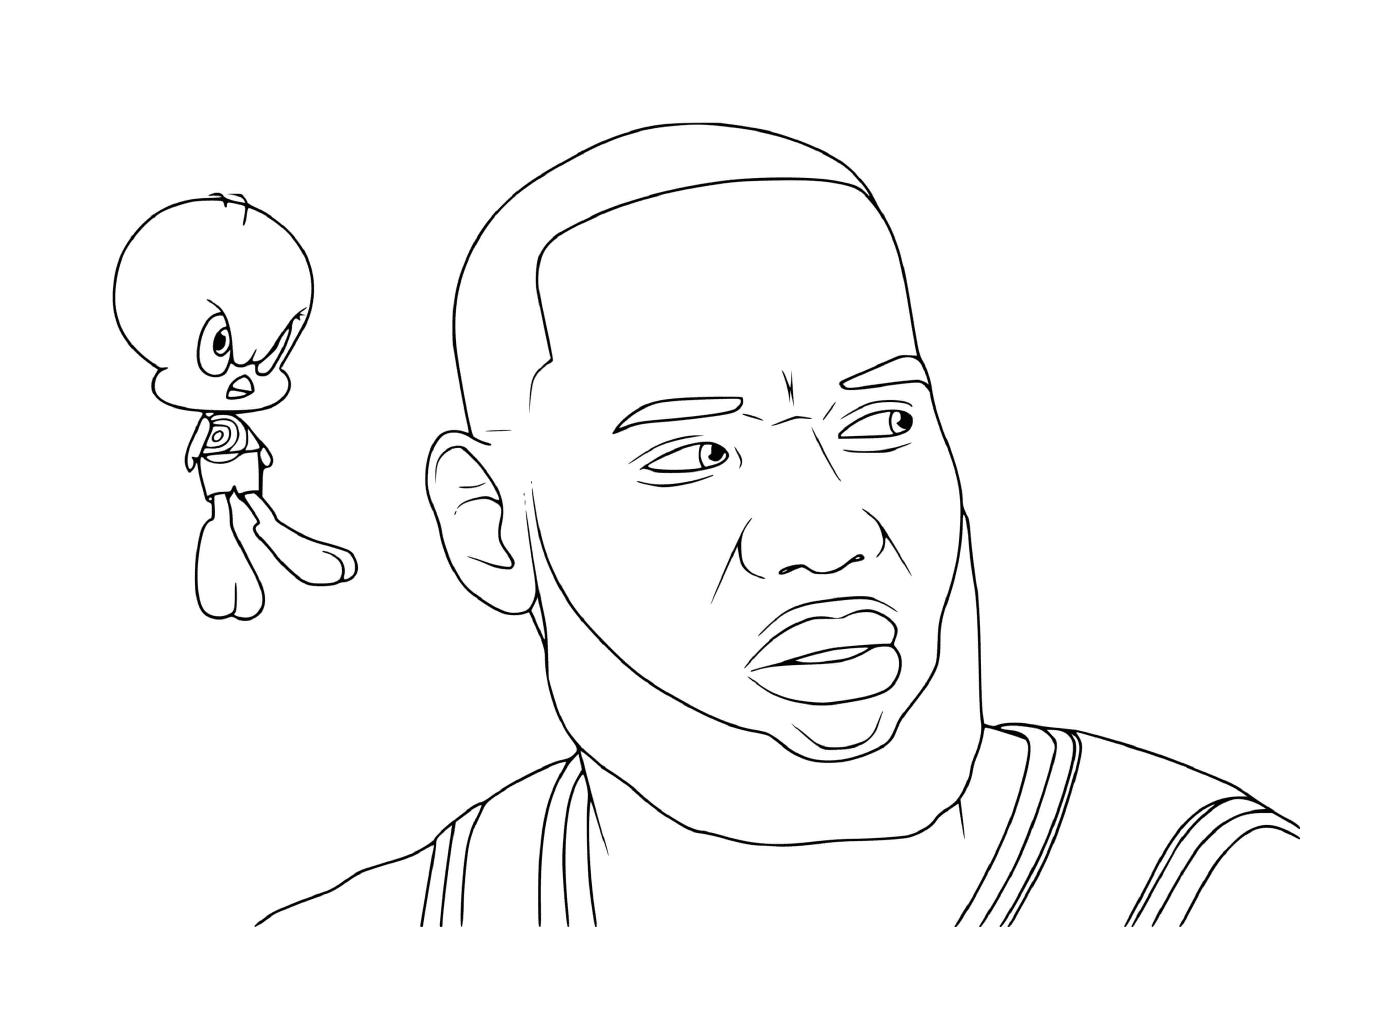 Space Jam Coloring Pages: 24 Printable Drawings